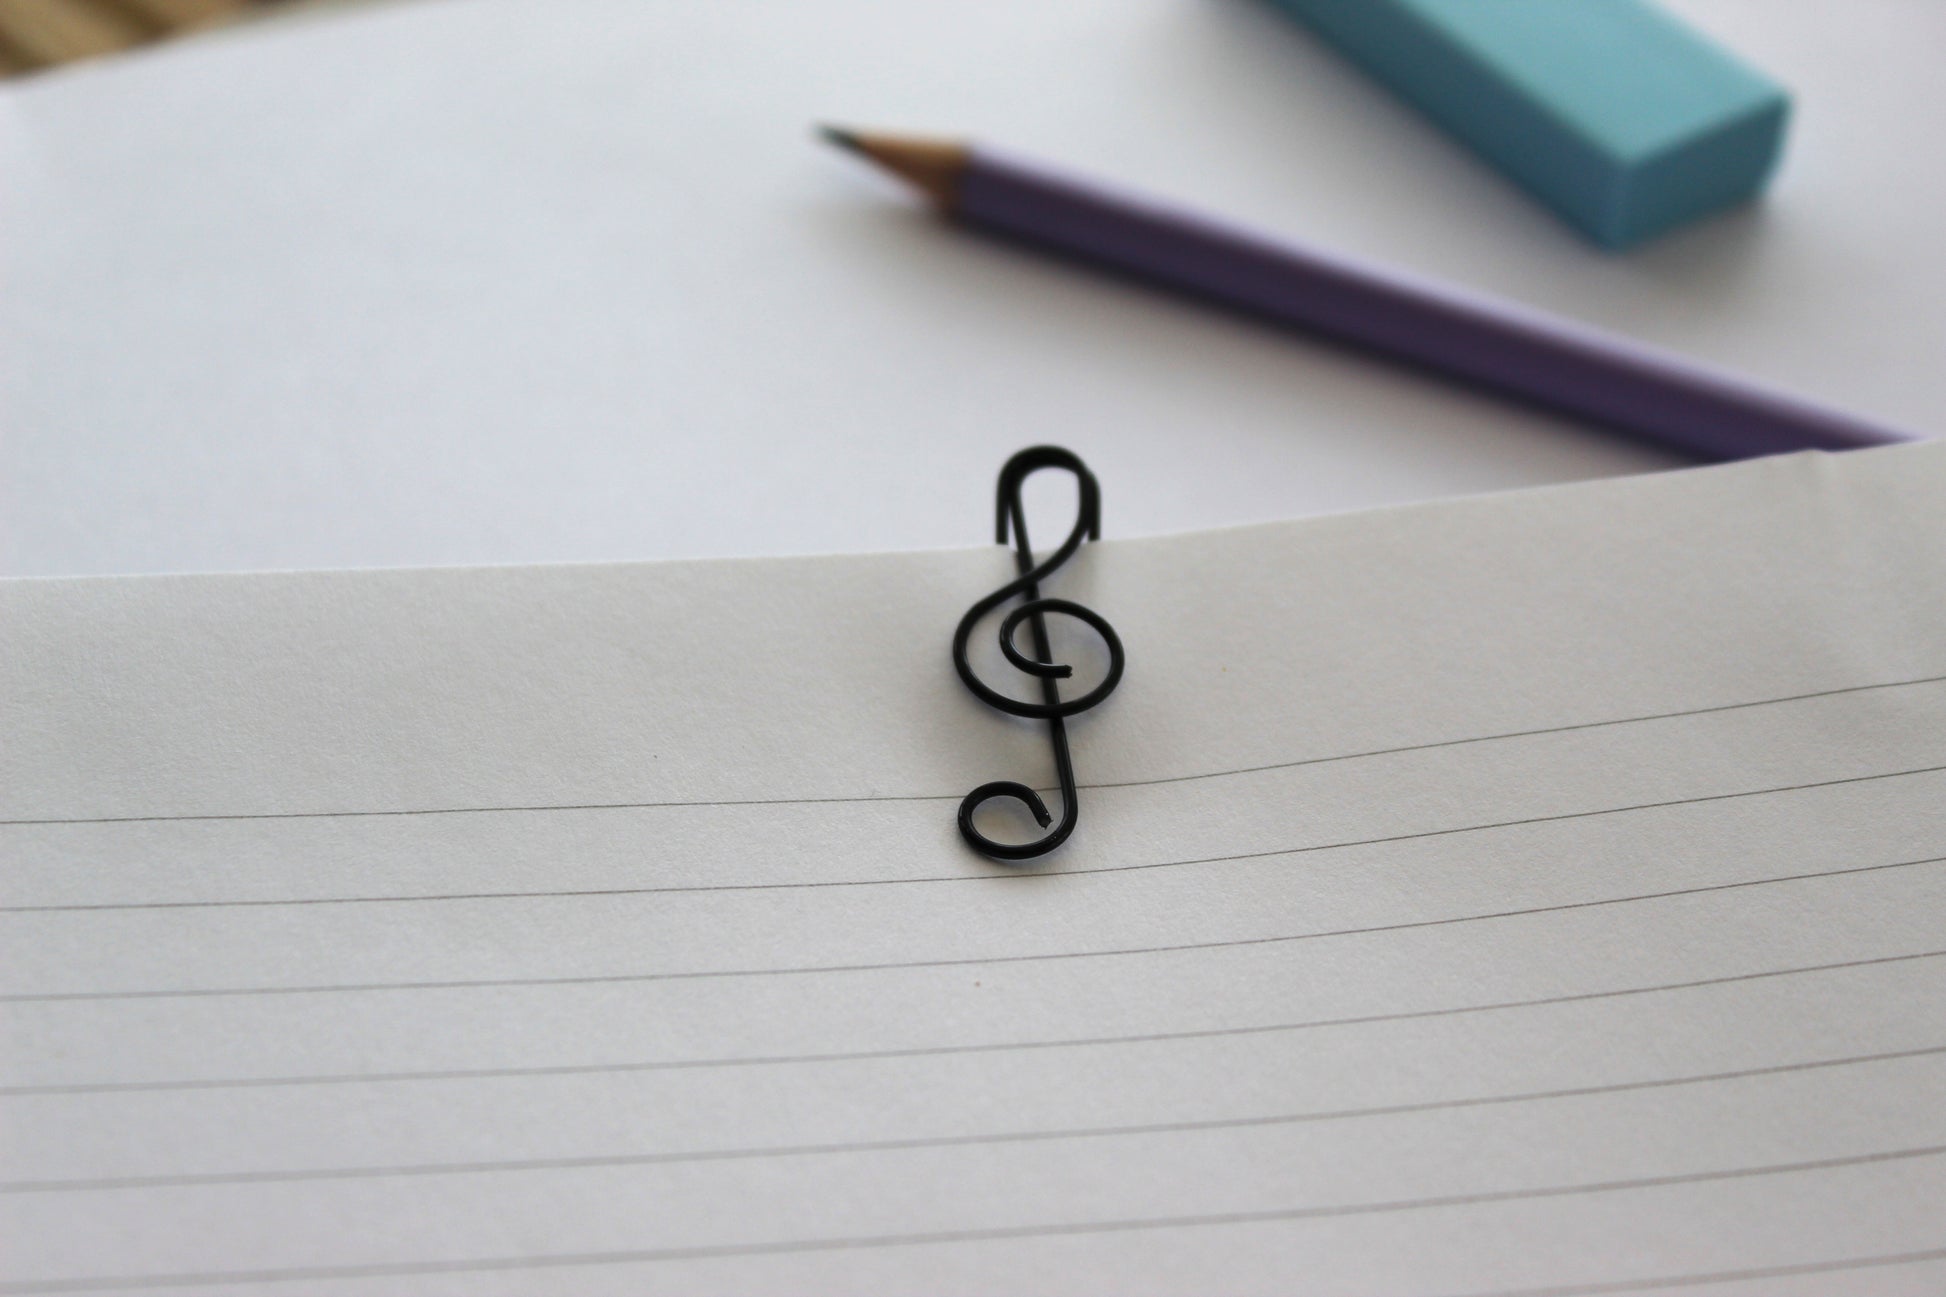 A black treble clef paperclip on a sheet of lined paper.